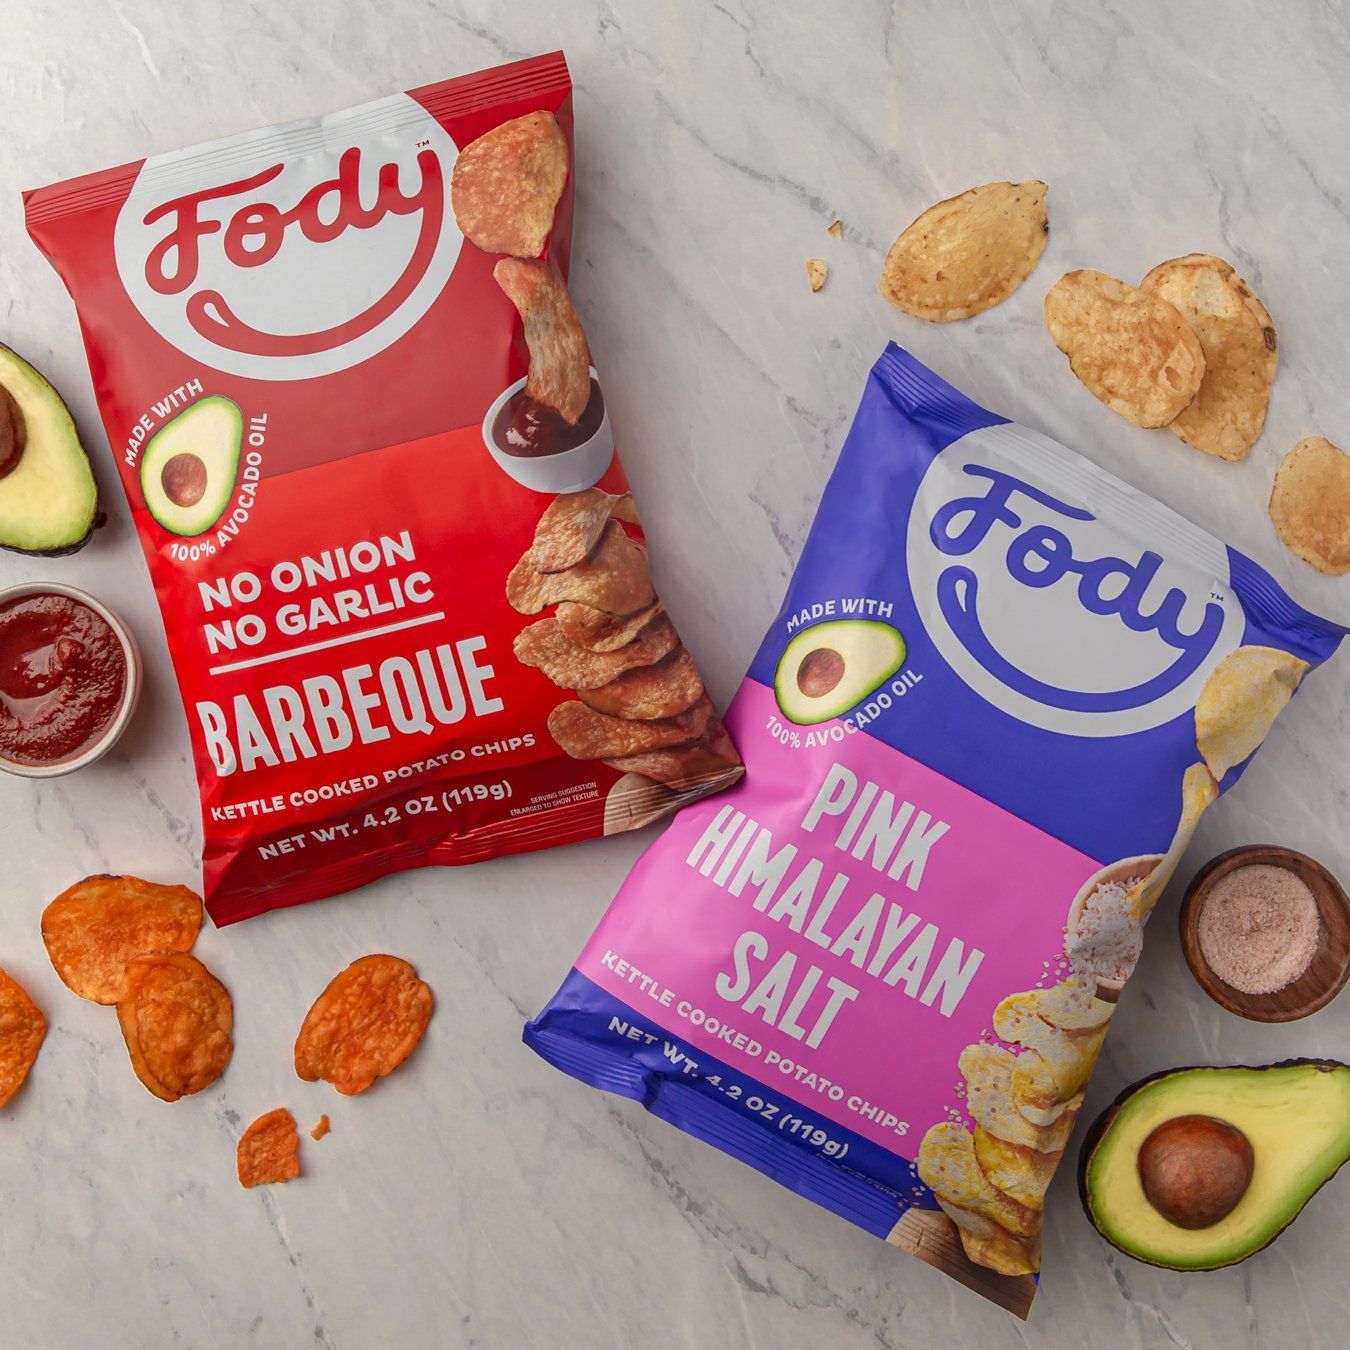 fody low fodmap bbq chips and fody low fodmap pink himalayan salt kettle chips with 2 avocado halves